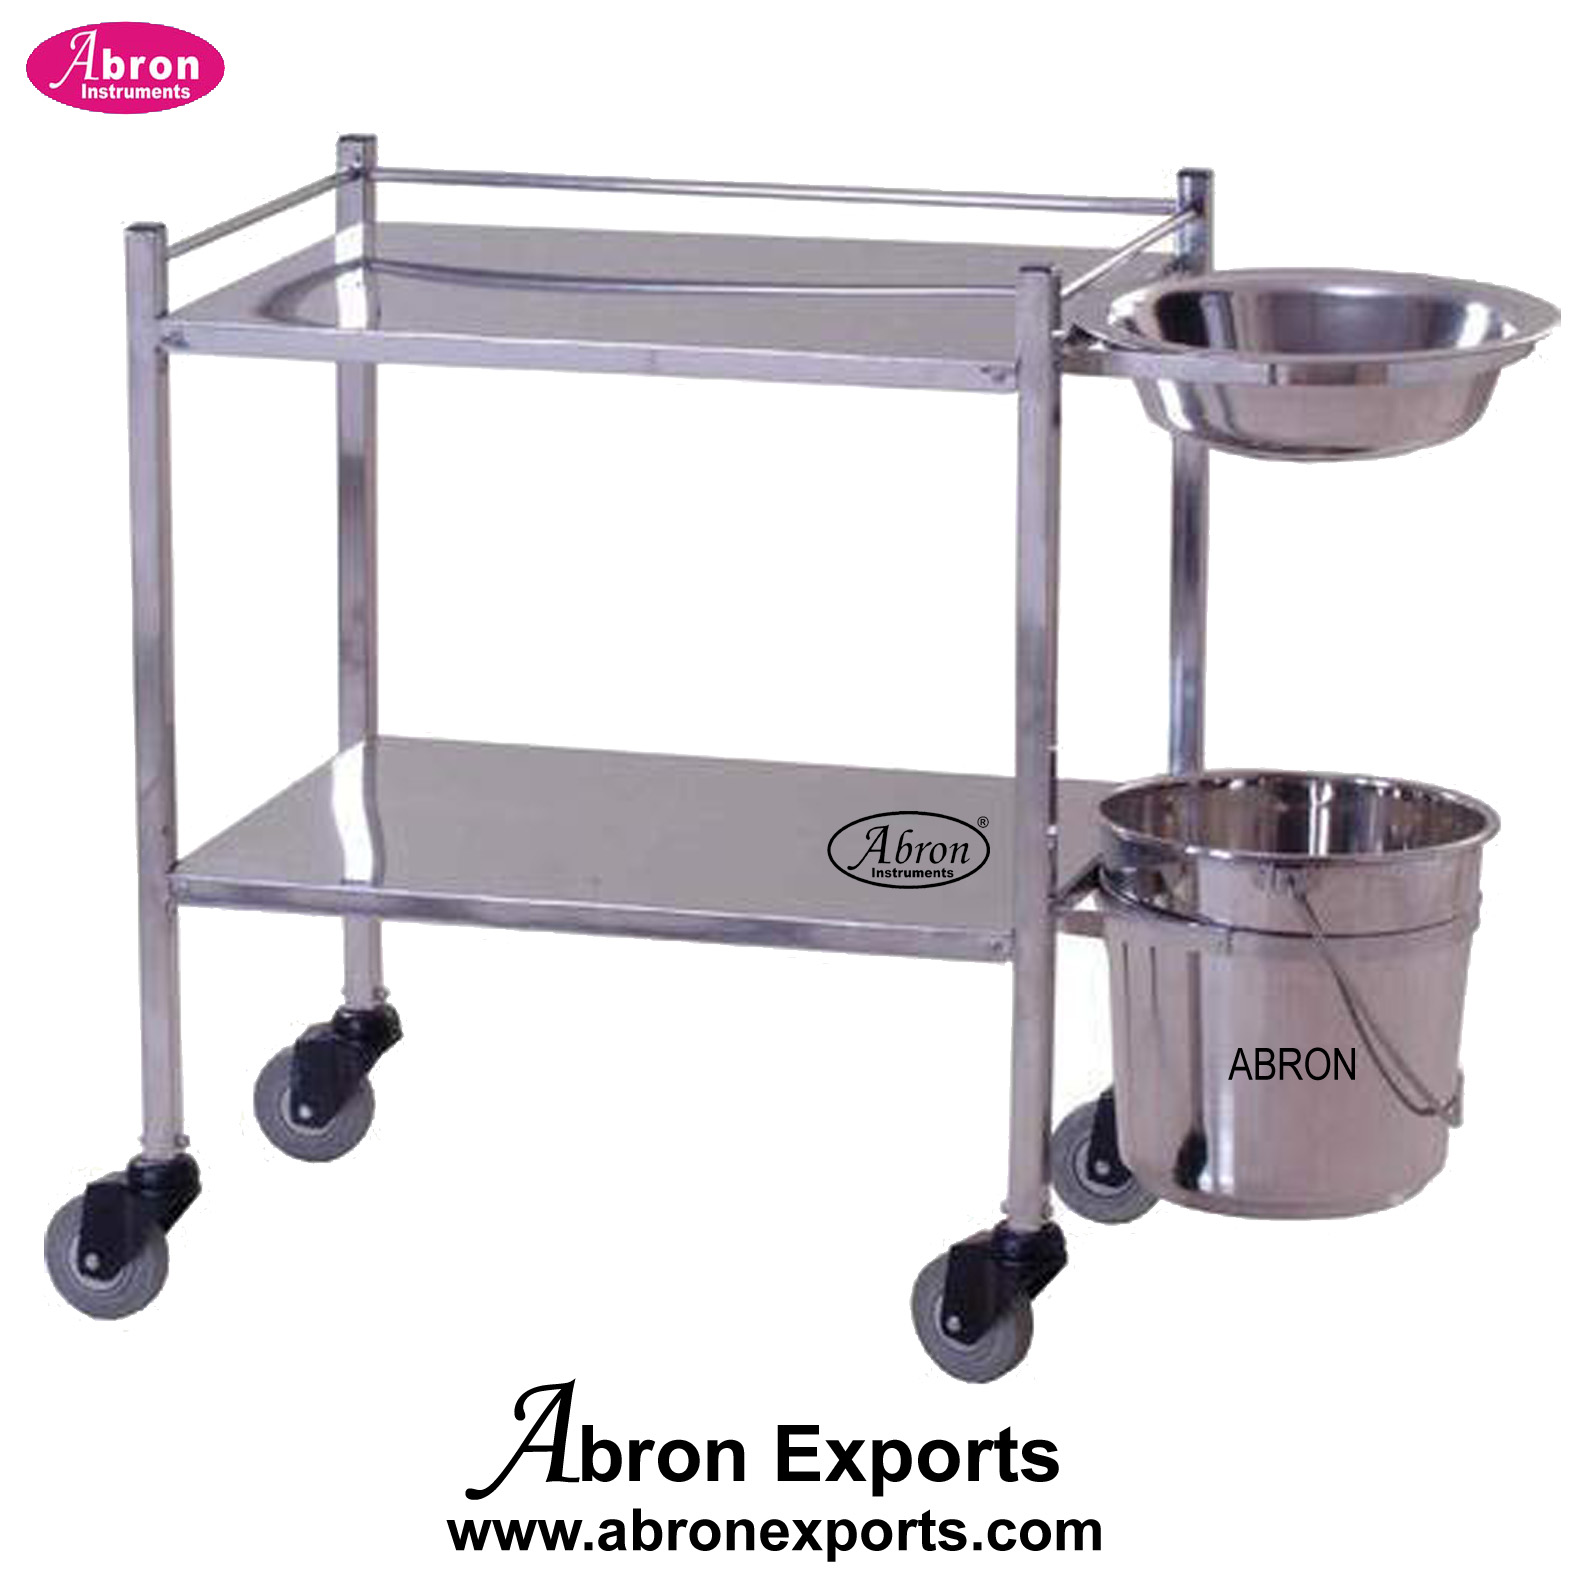 Dressing Trolley With Bucket Bowl 4 wheels SS Stainless Steel with Hospital Medical Nursing Room Abron ABM-2267TD23 